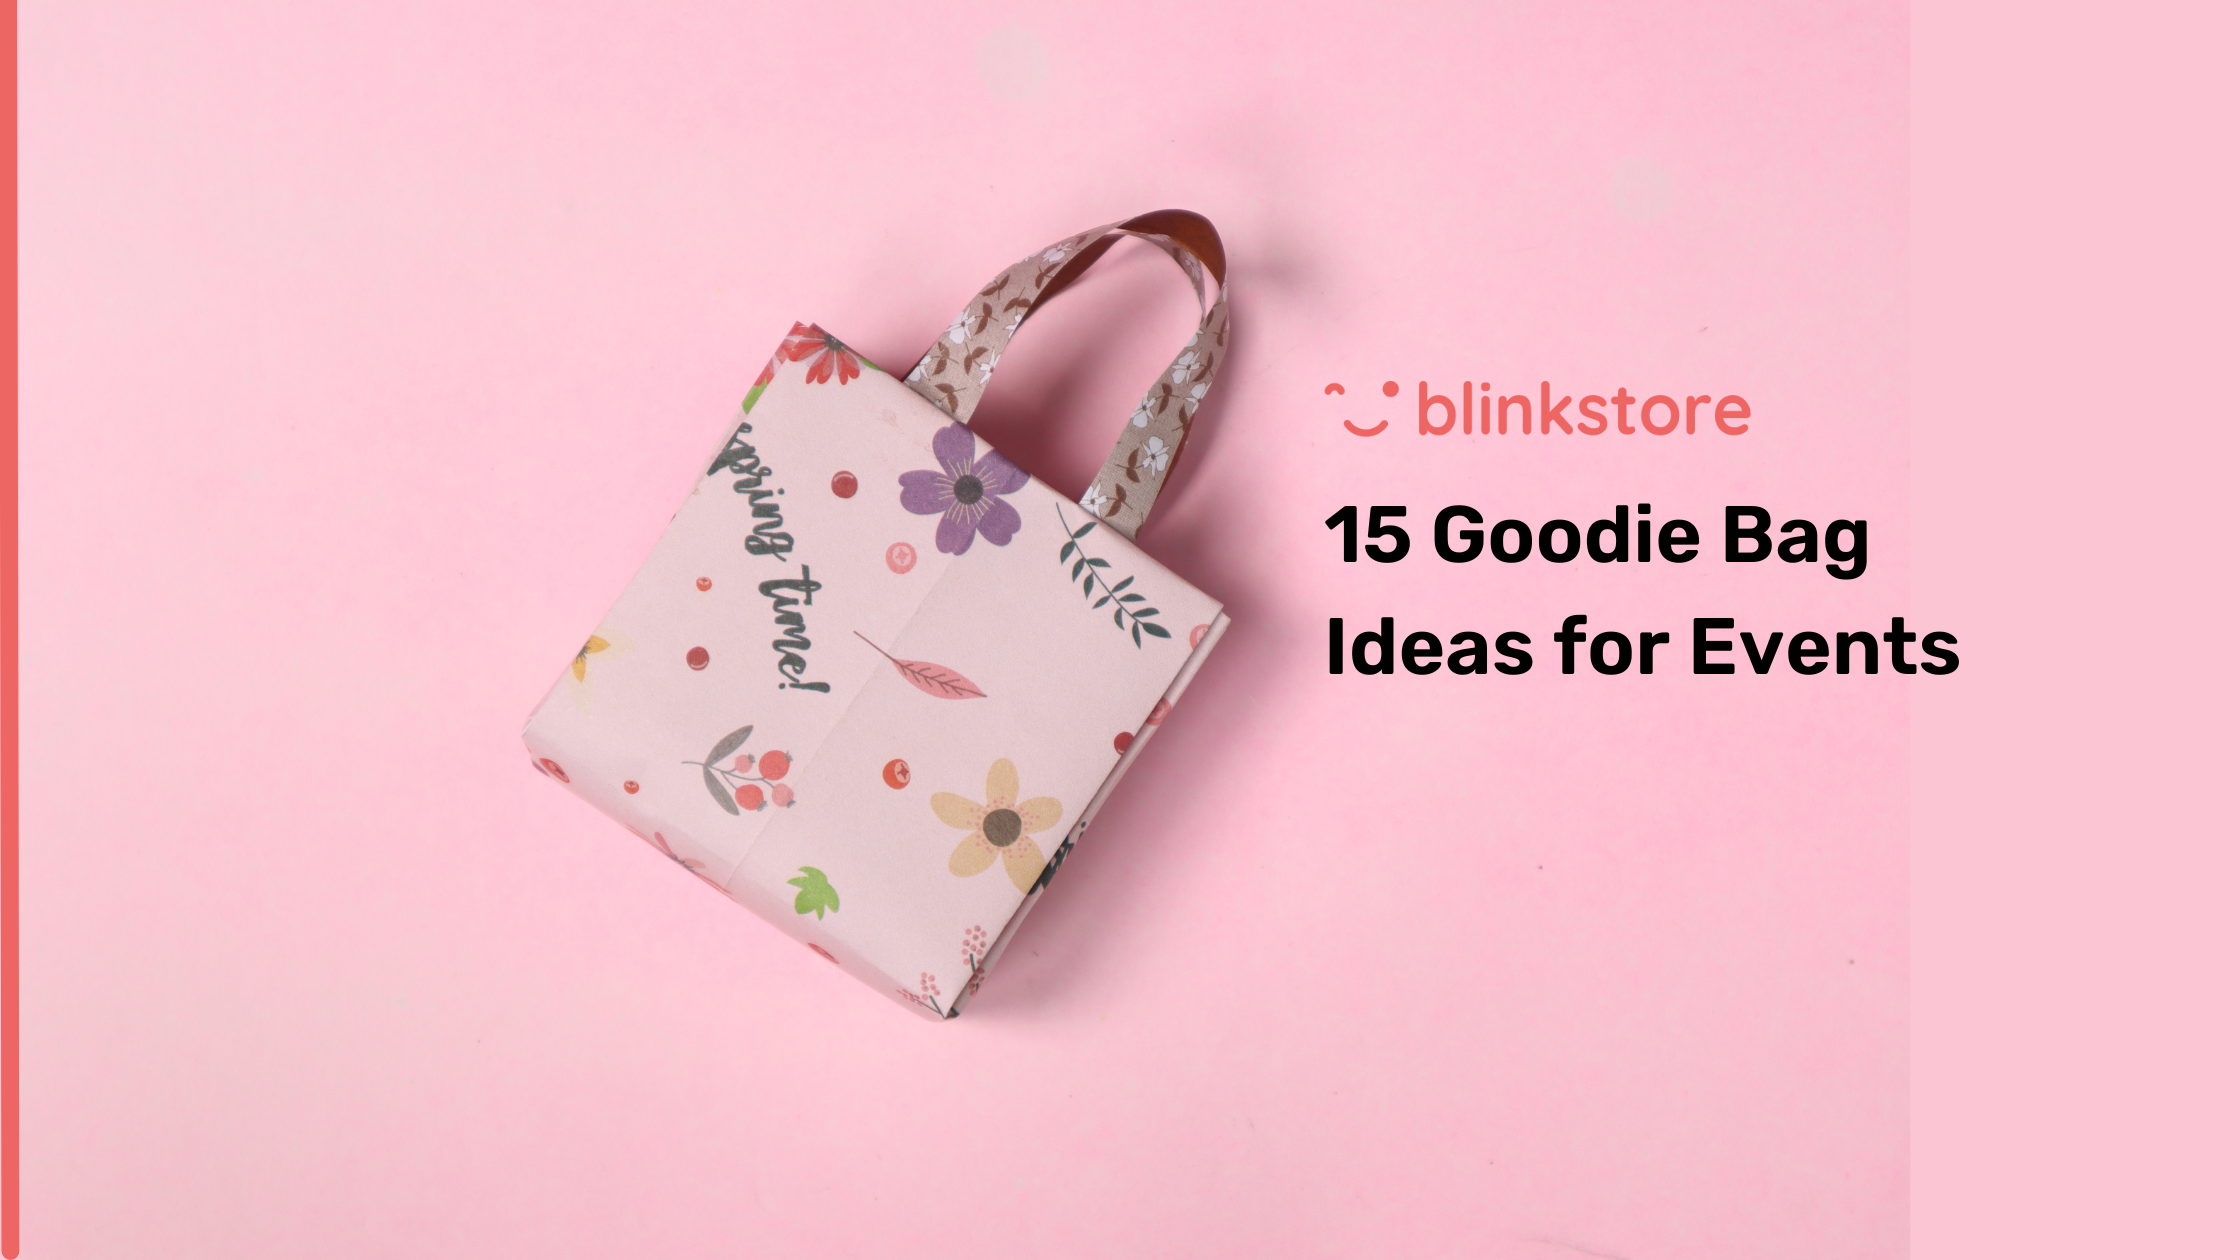 15 Goodie Bag Ideas for Events